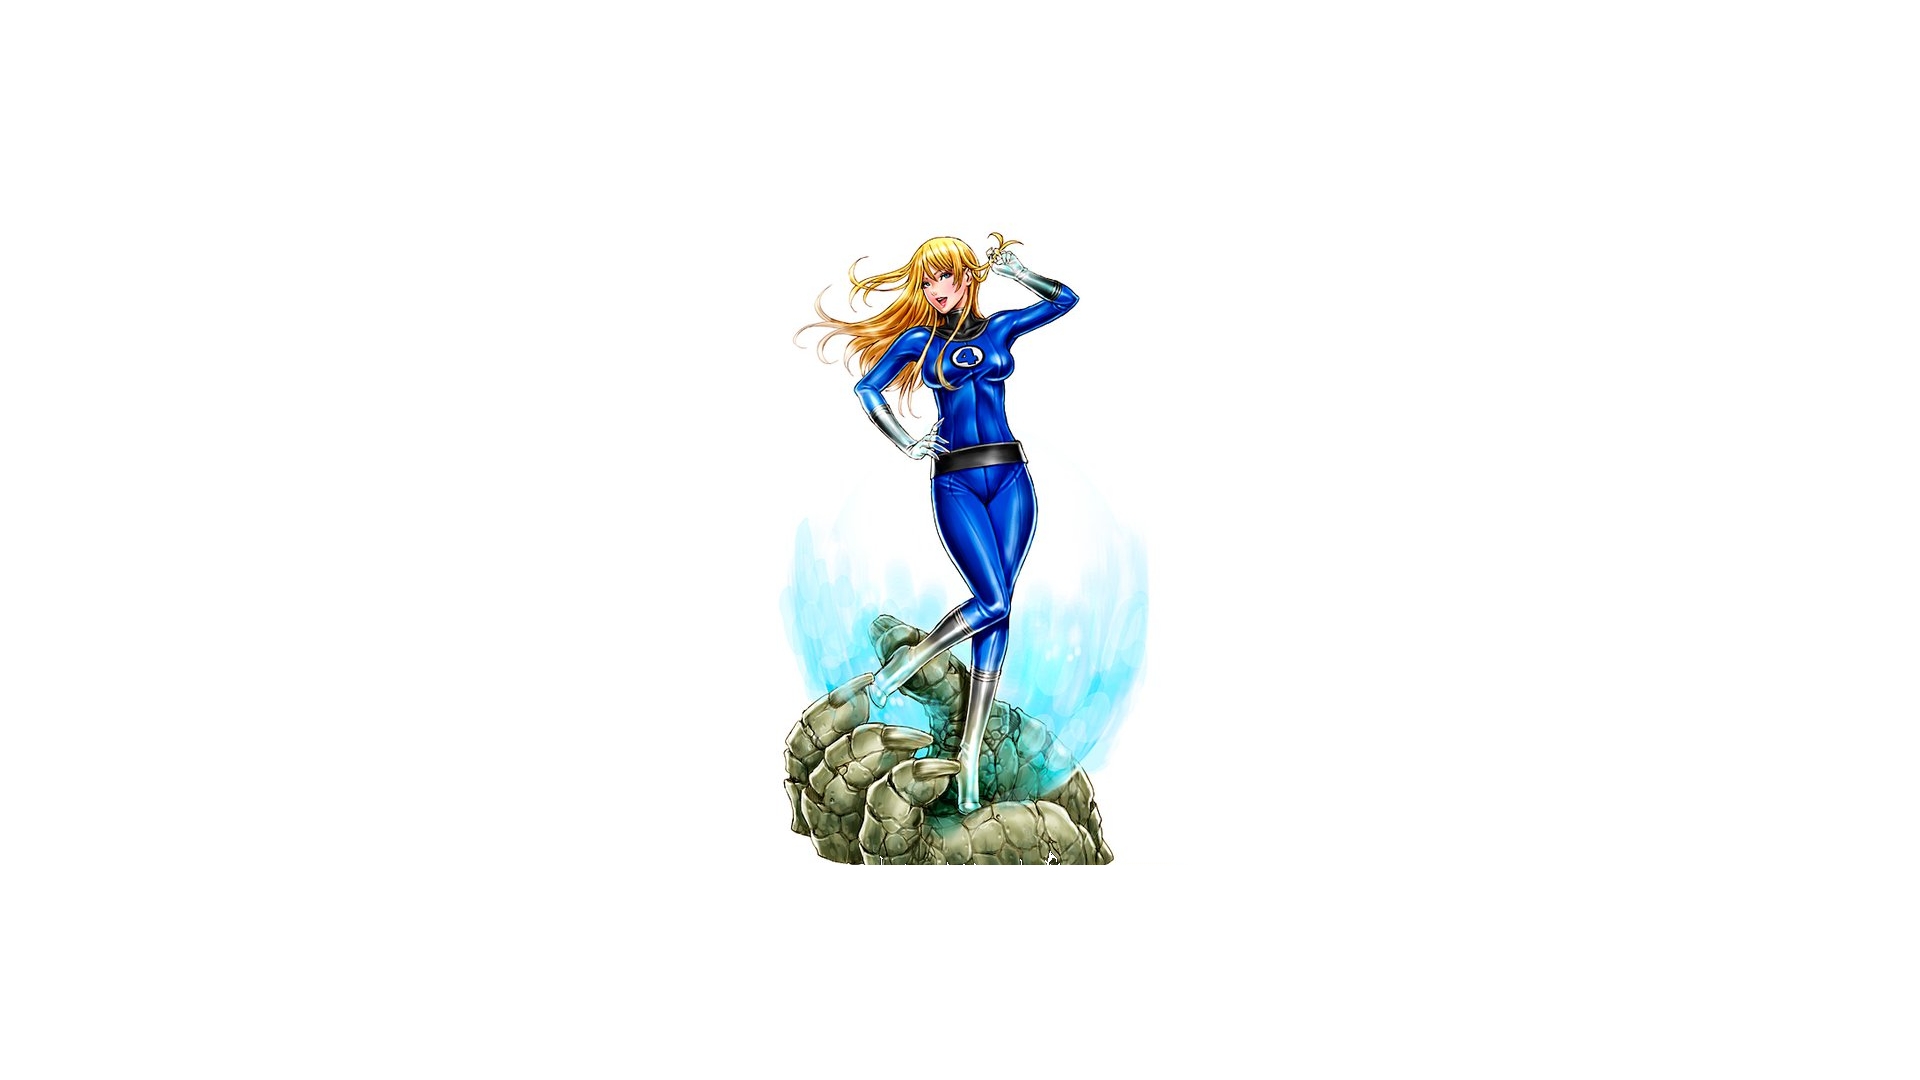 Invisible Woman from the X-Men comics.